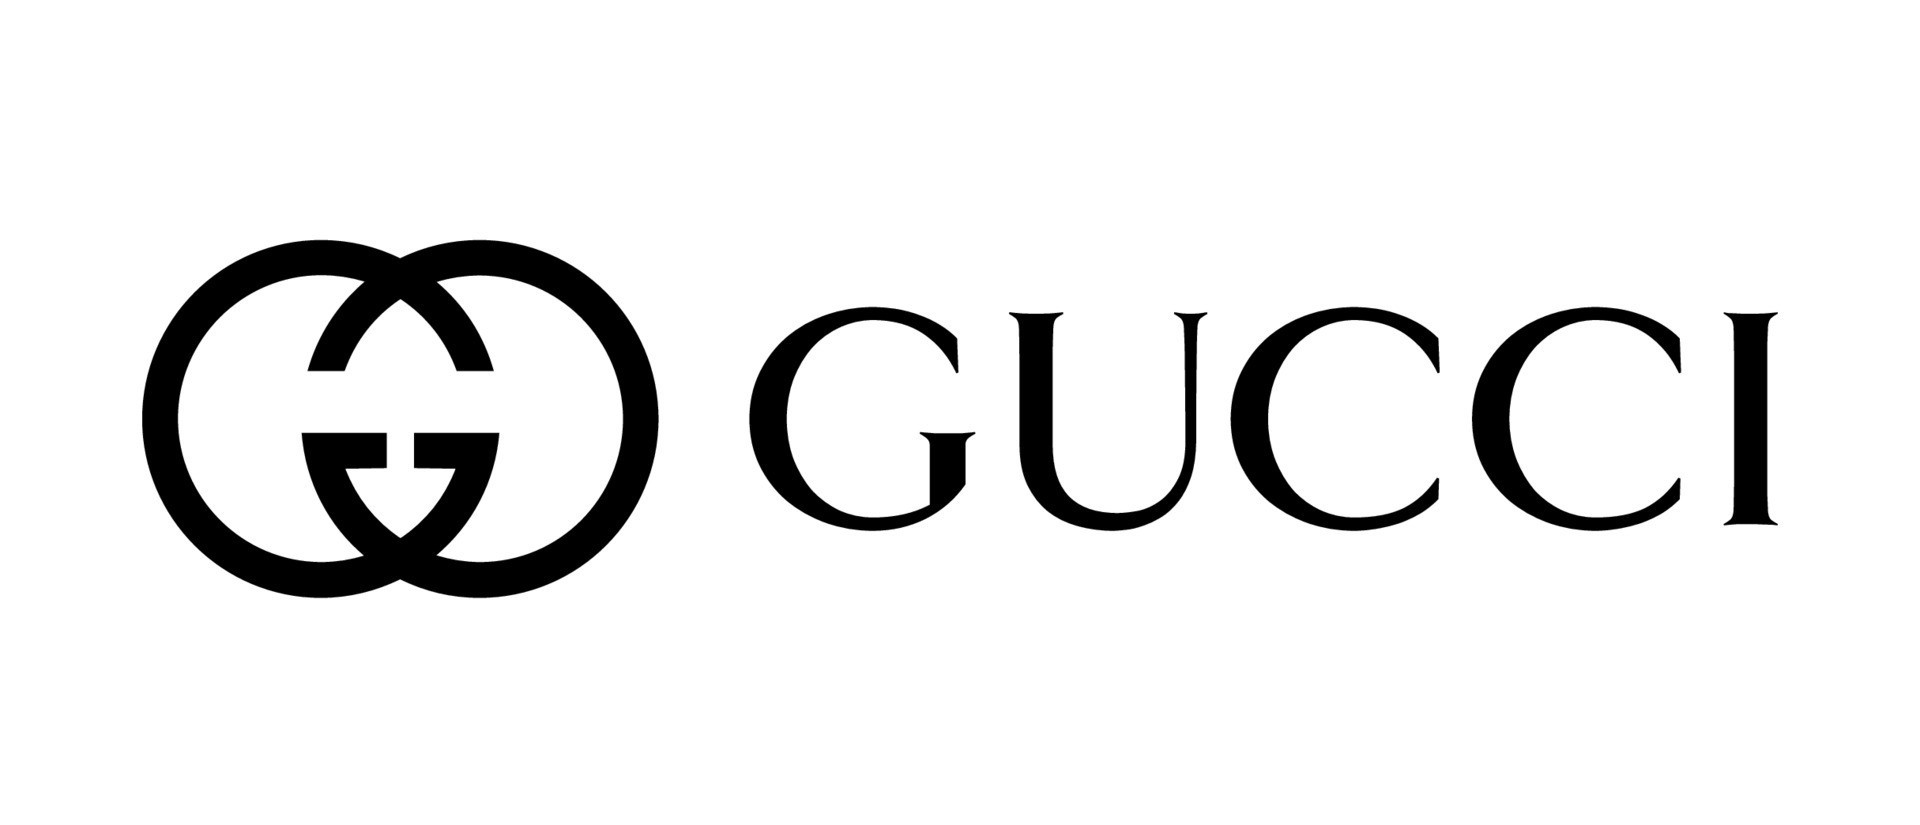 gucci-logo-gucci-icon-with-typeface-on-white-and-black-background-free-vector